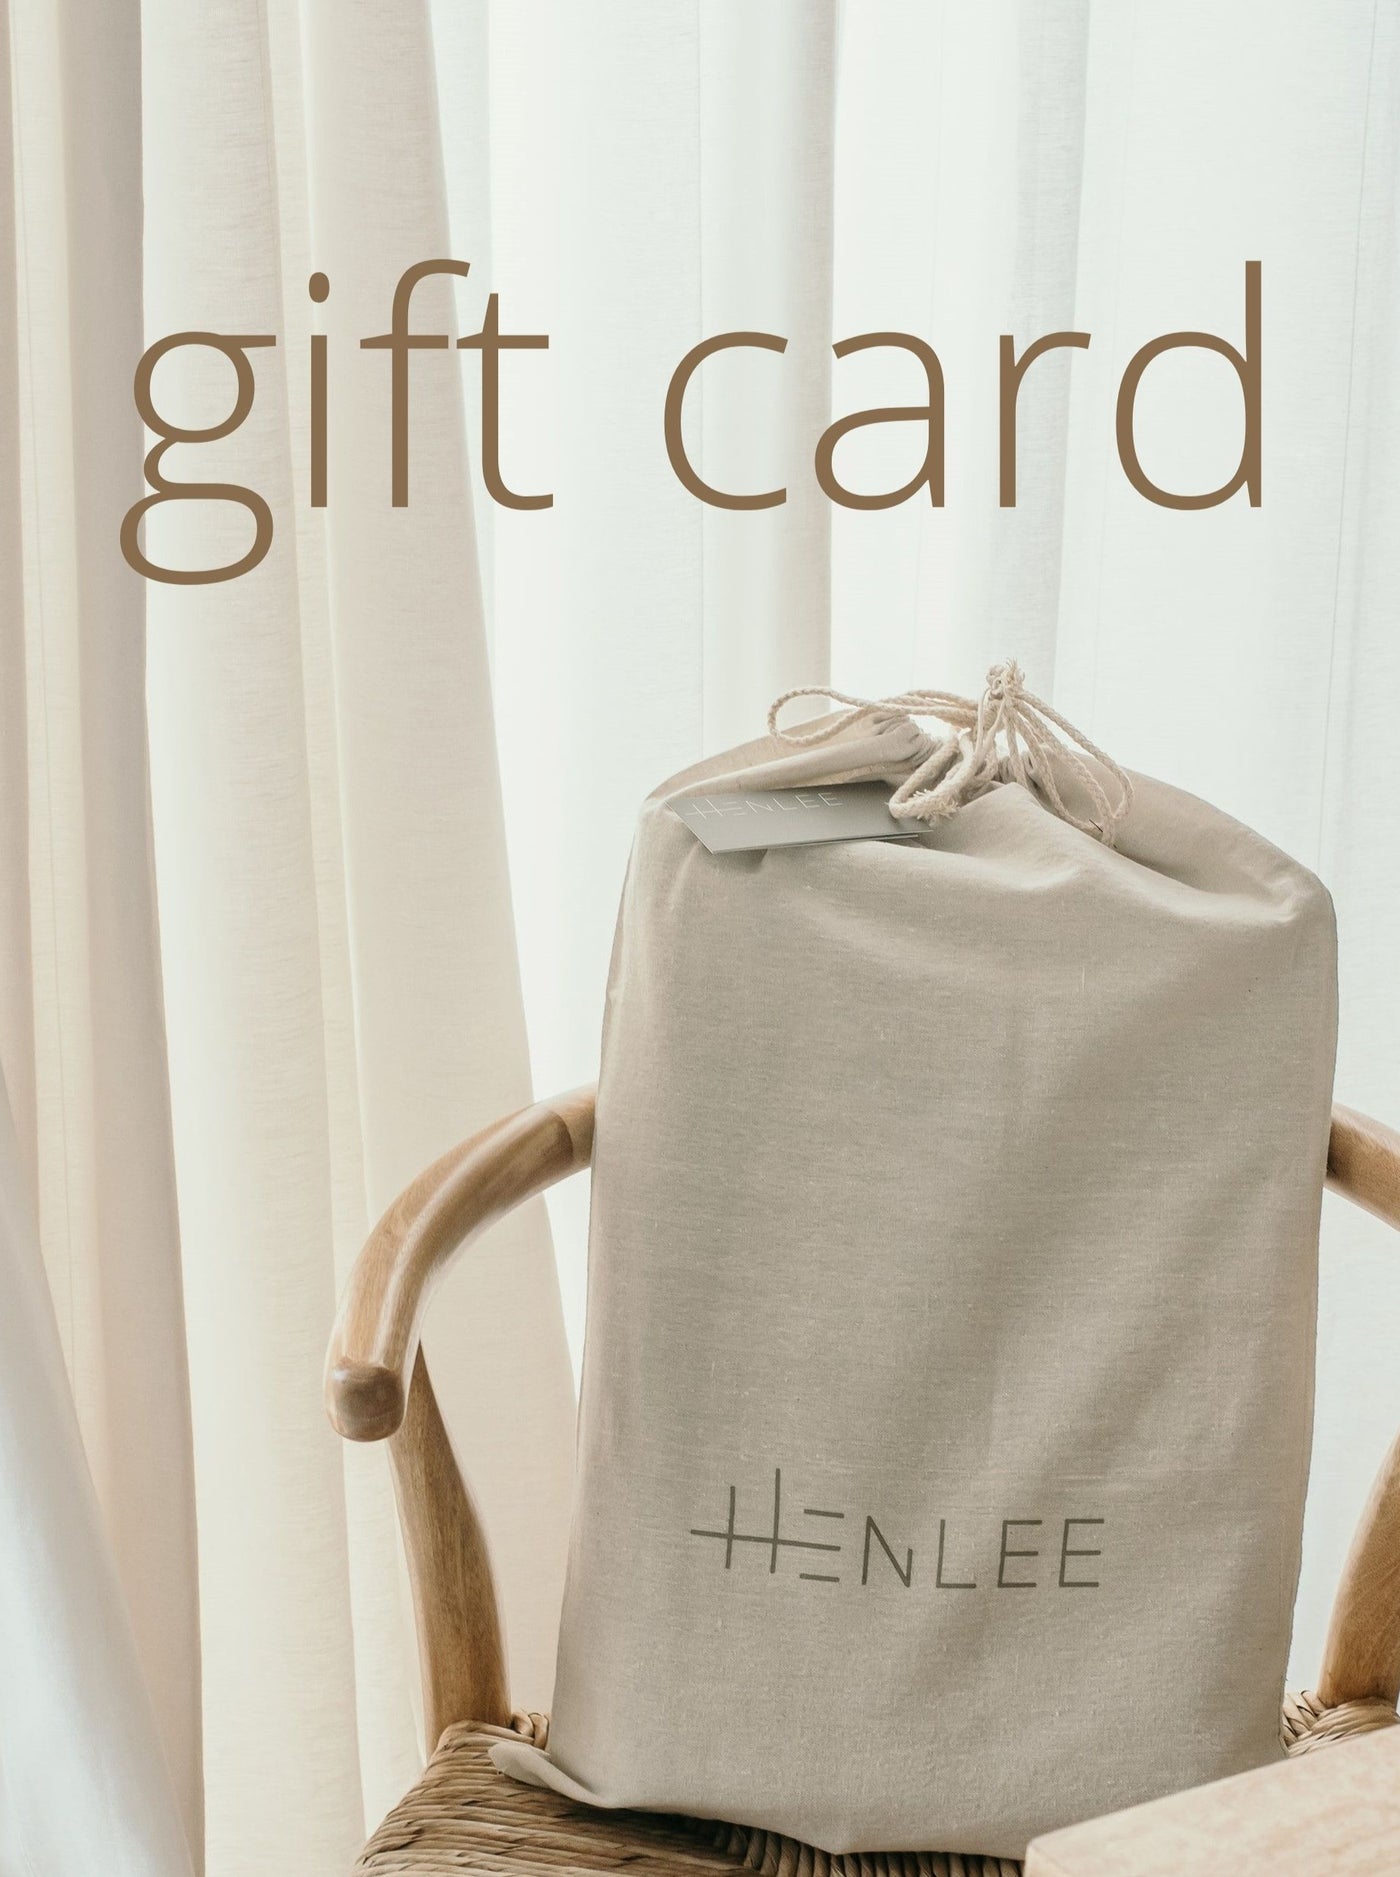 Gift card - henlee.co